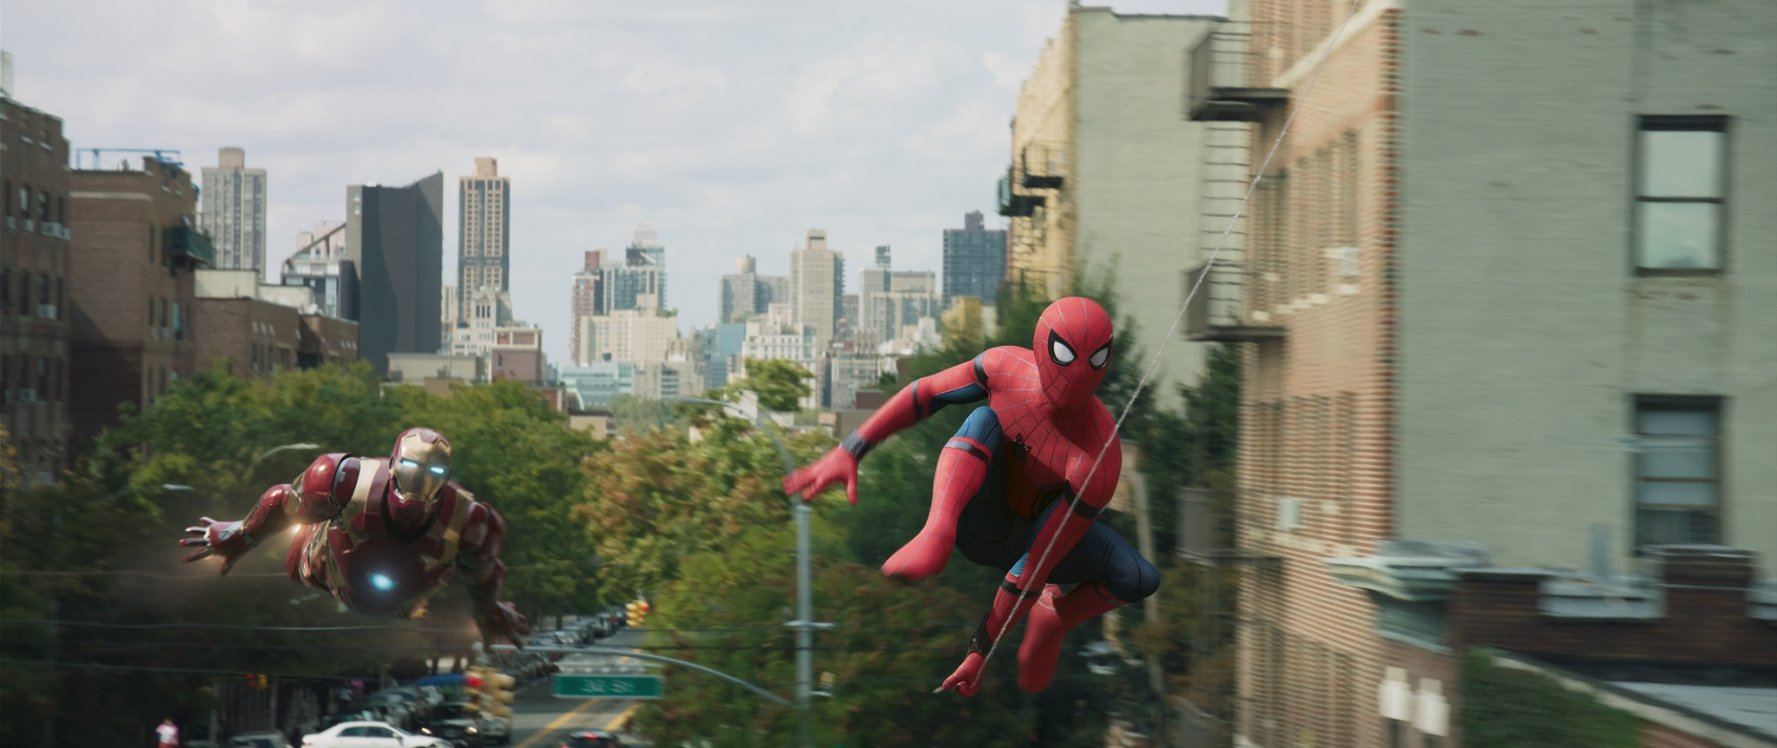 Iron Man and Spider-Man in Spider-Man: Homecoming